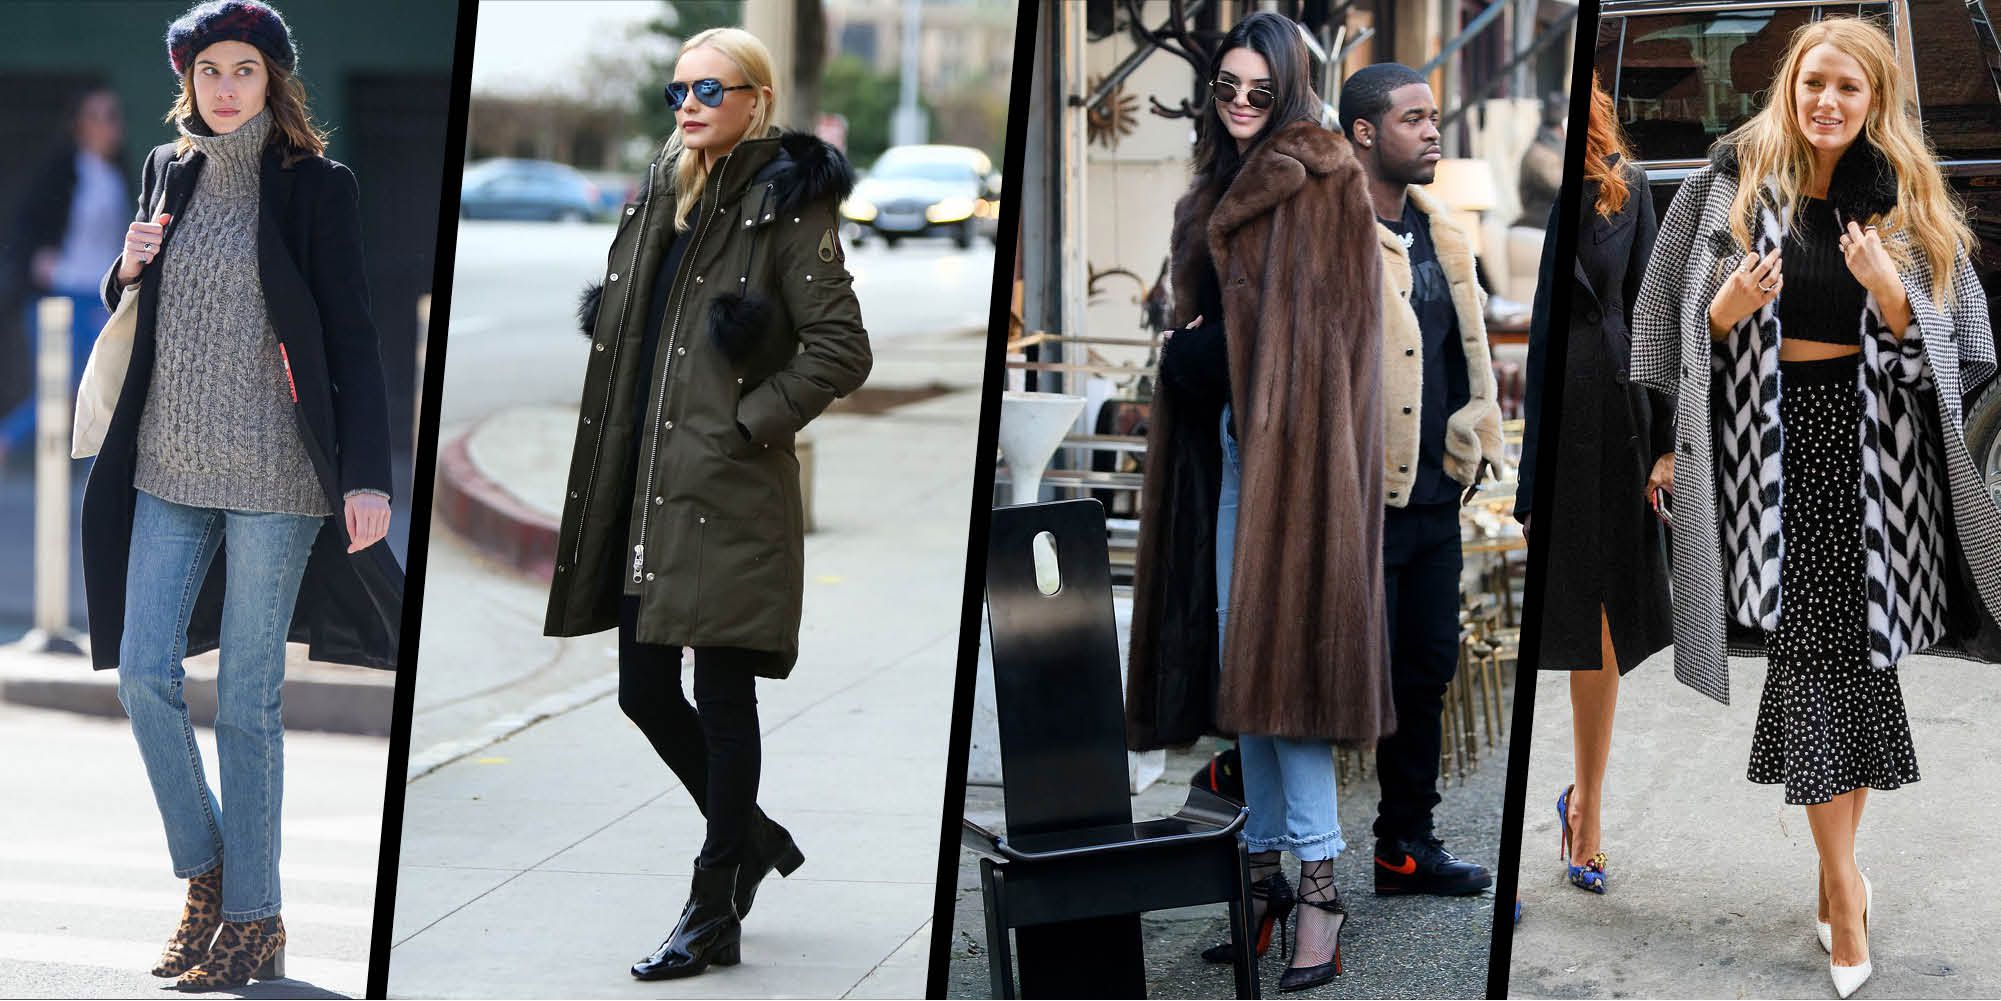 Winter style inspiration from the A-list u2013 Celebrity style